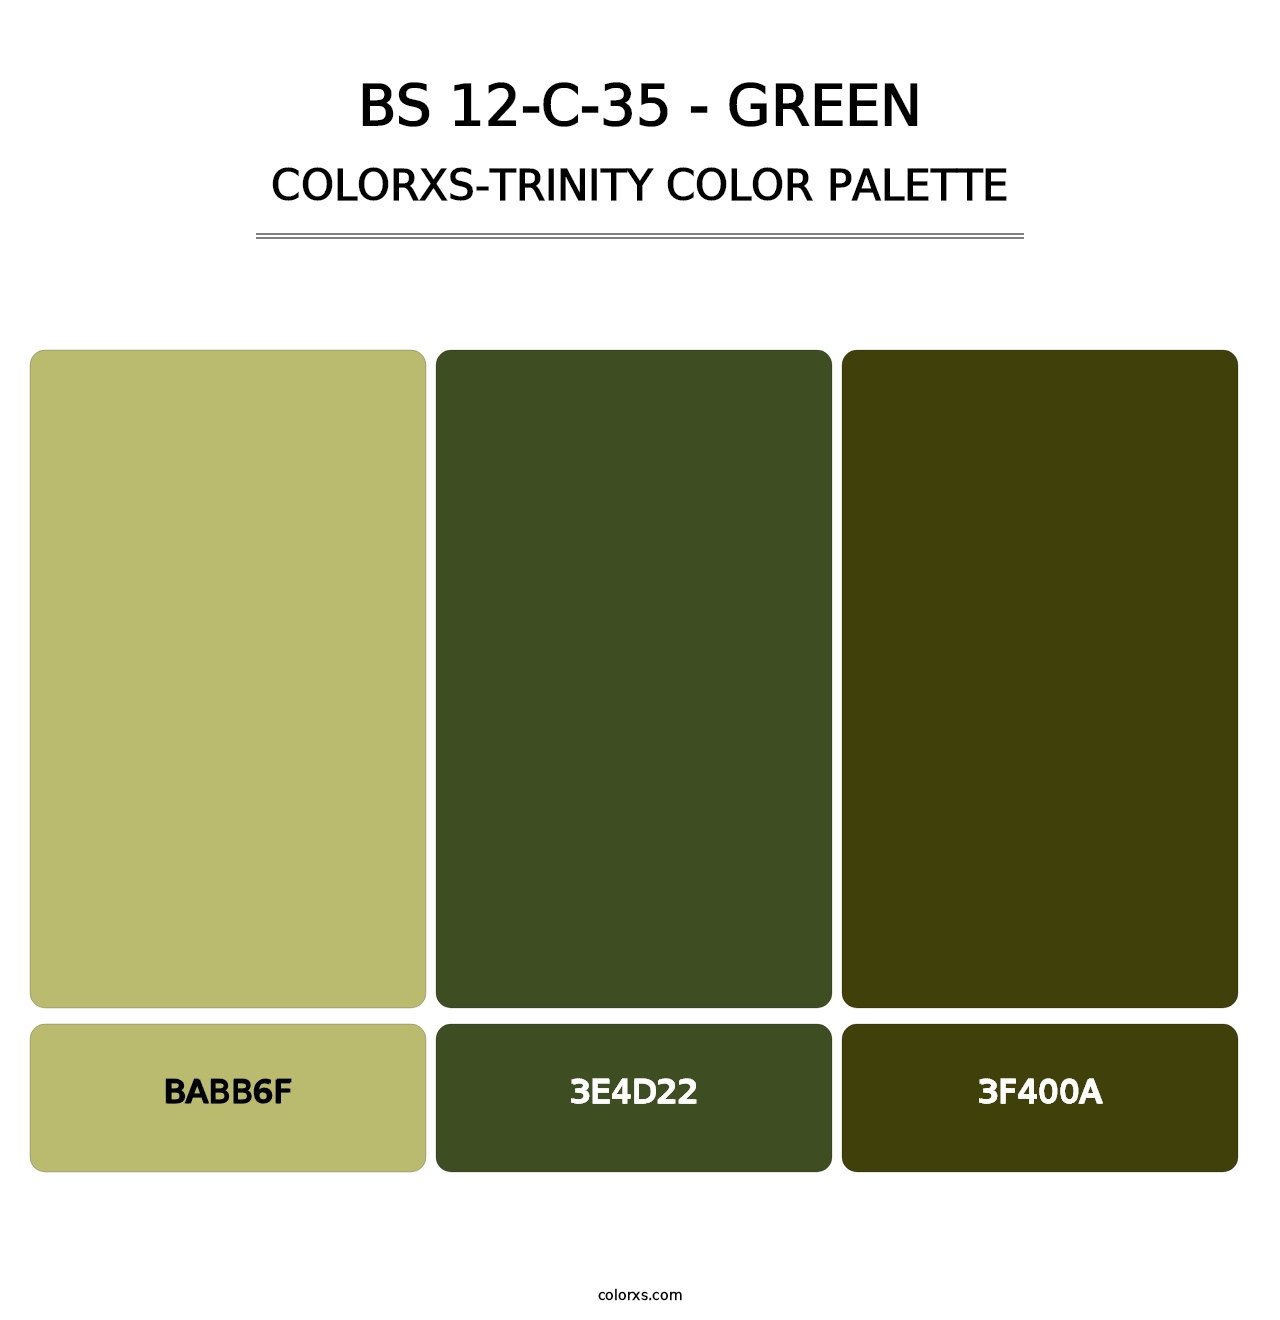 BS 12-C-35 - Green - Colorxs Trinity Palette